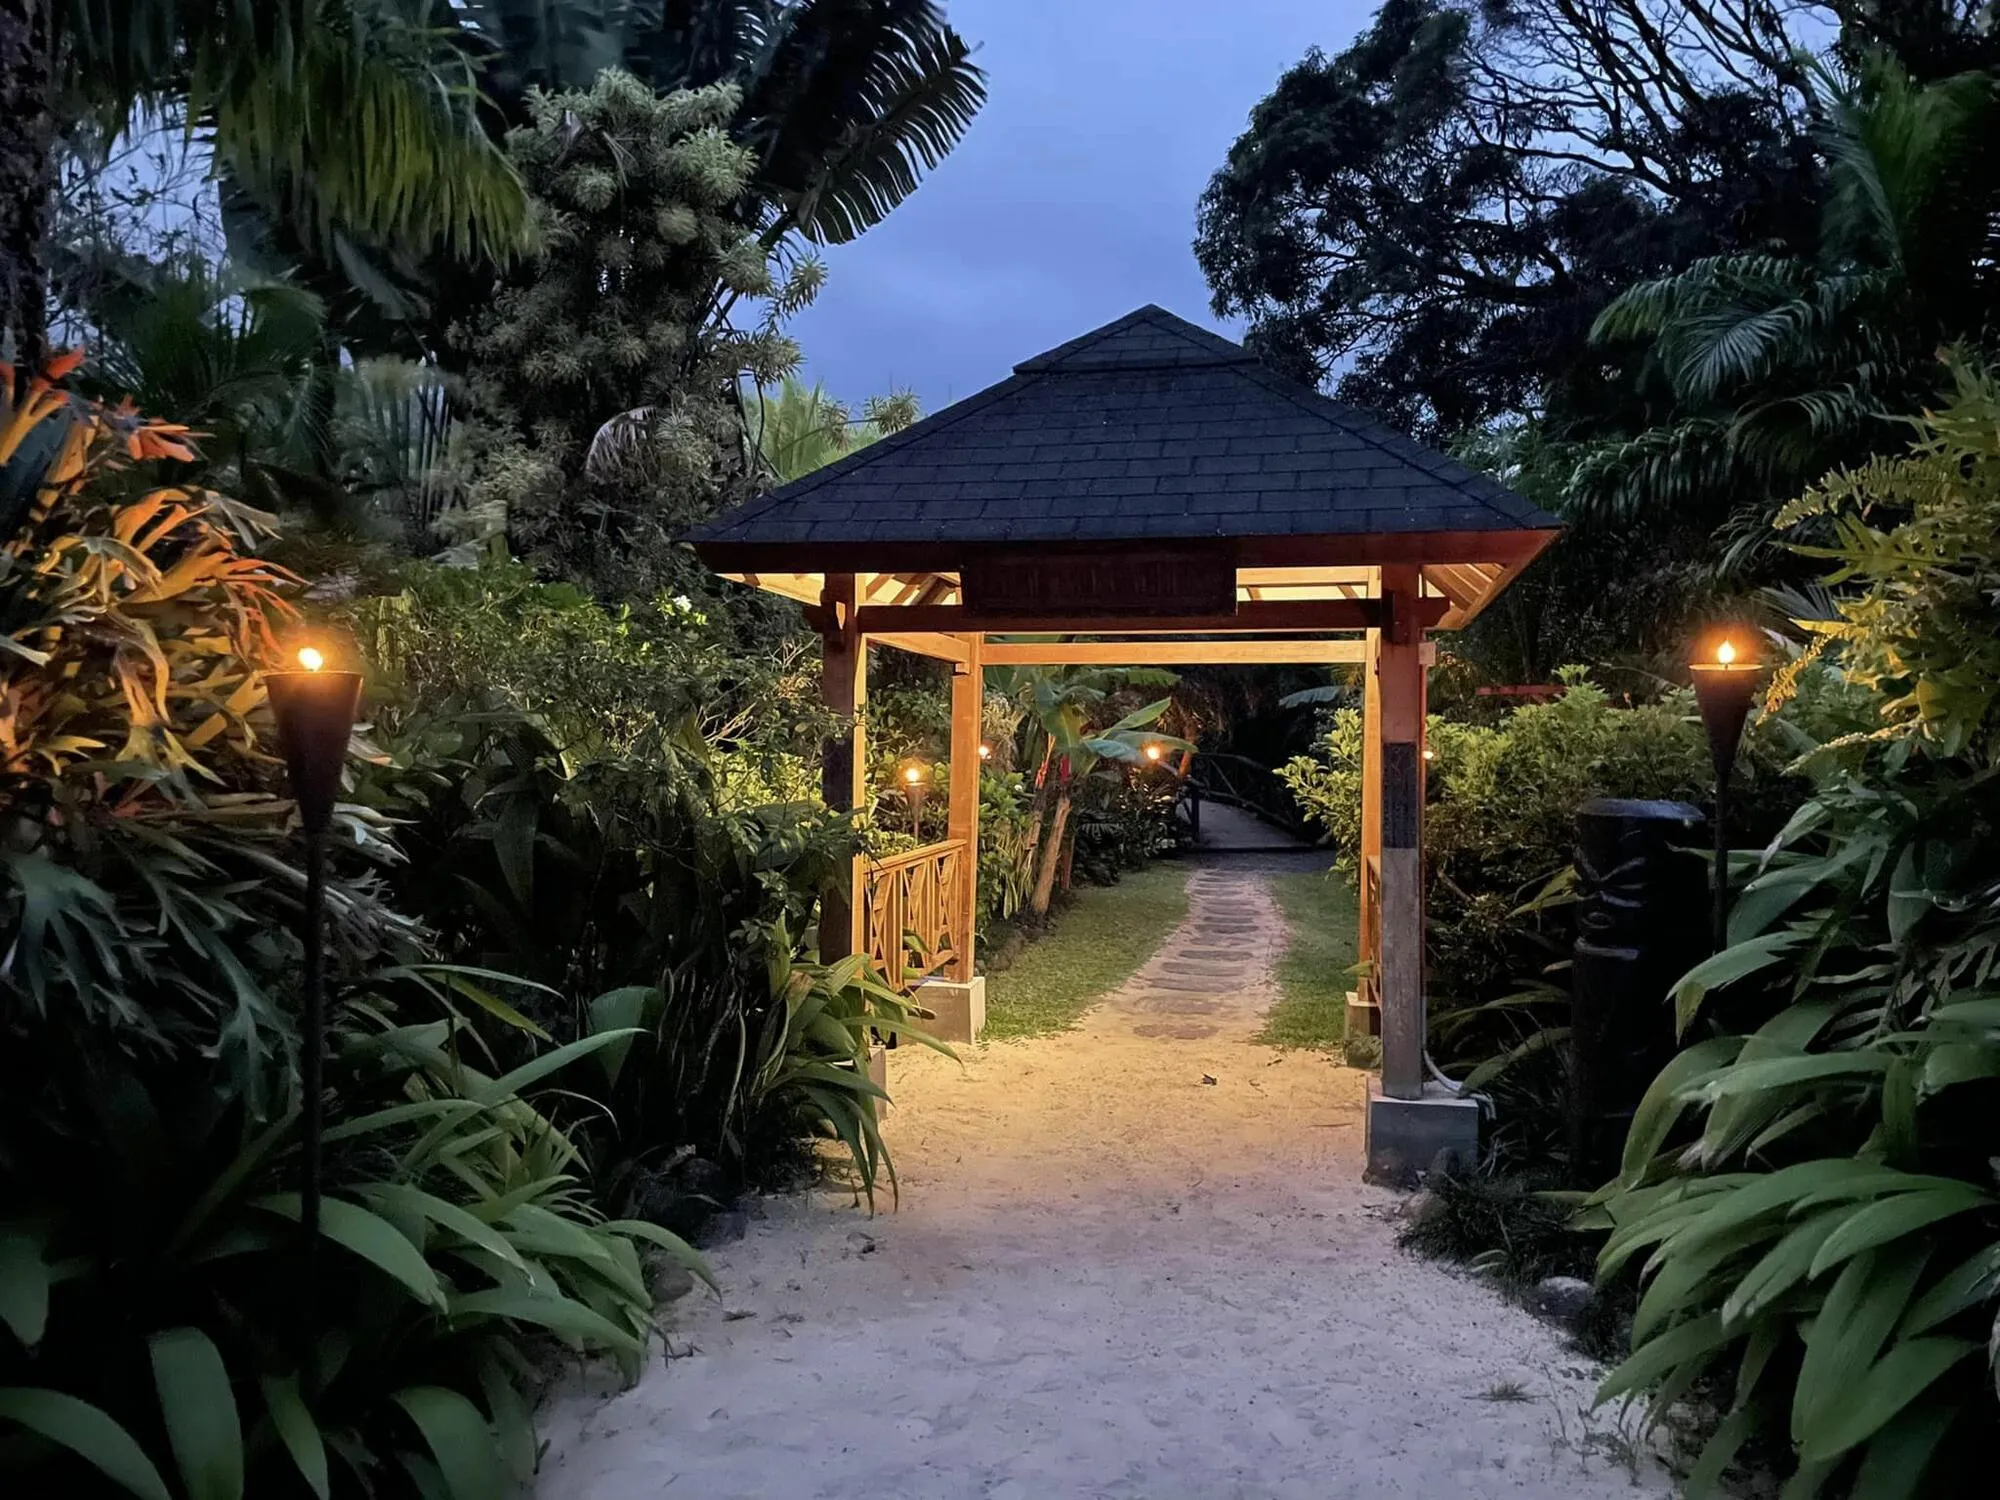 Maire Nui Botanical Gardens in Cook Islands, Australia and Oceania | Botanical Gardens - Rated 0.9